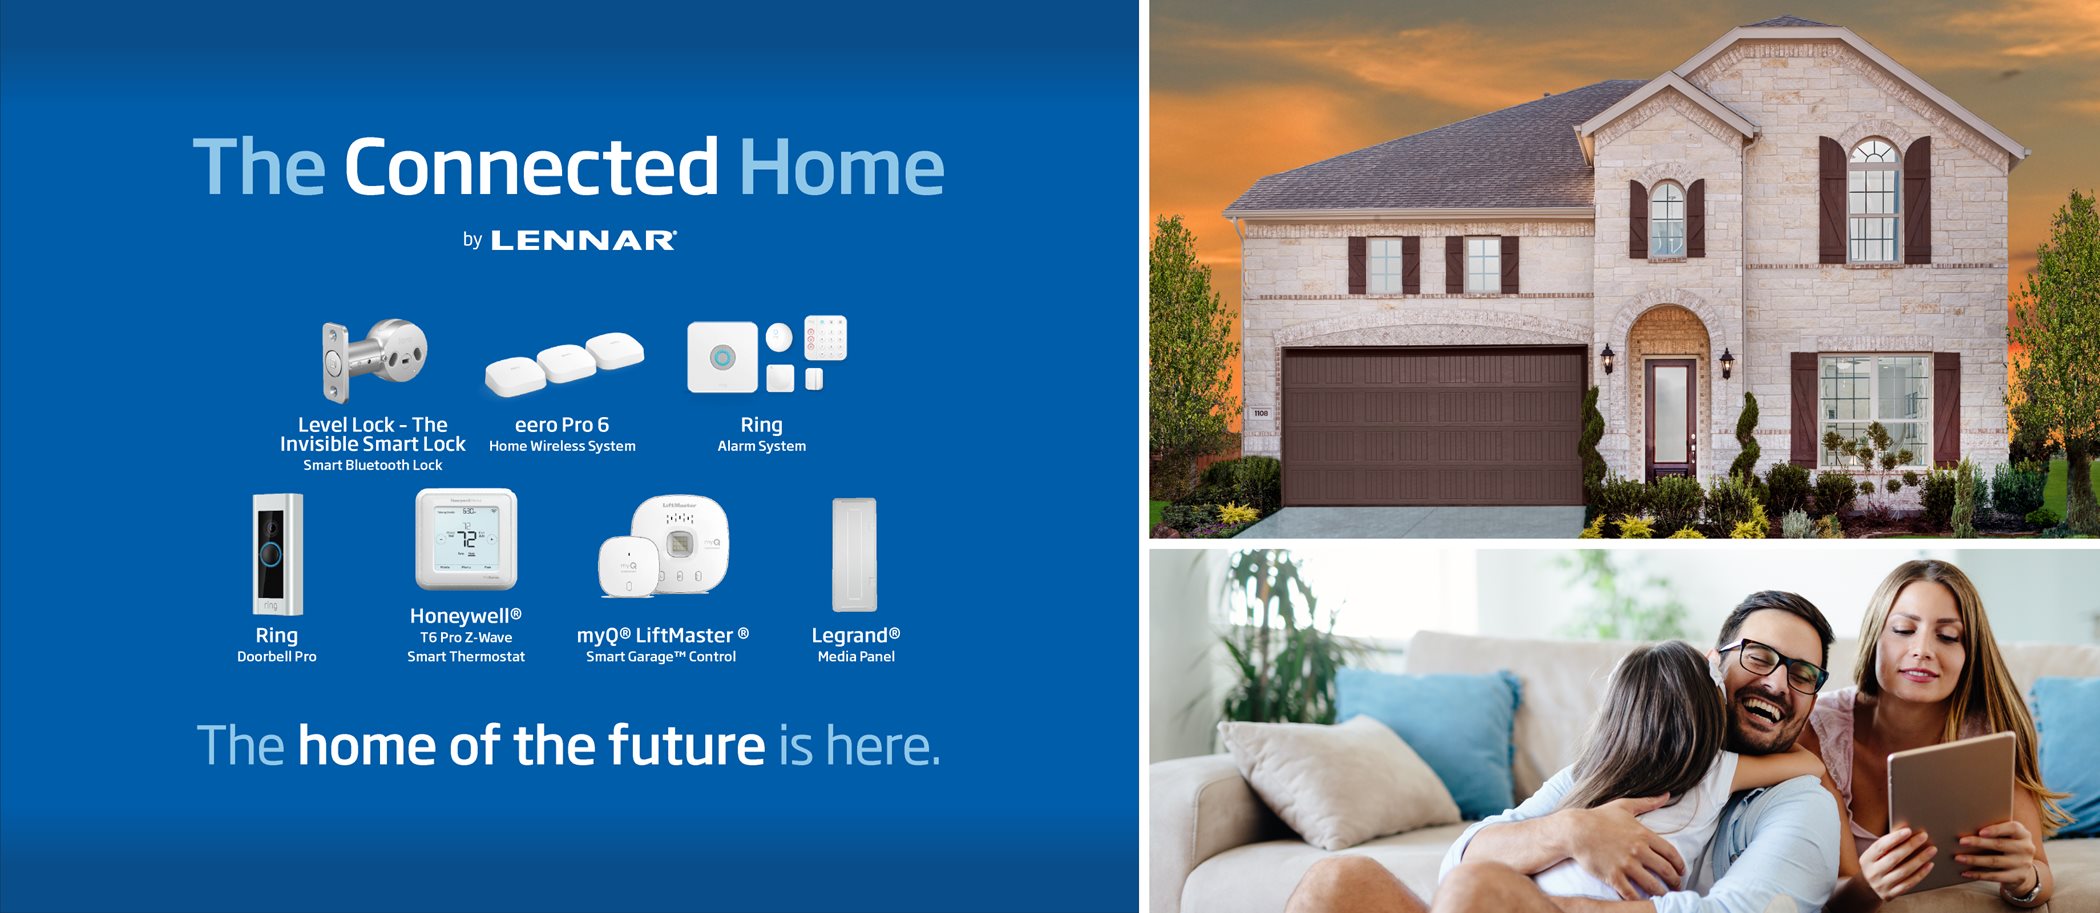 The Connected Home By Lennar